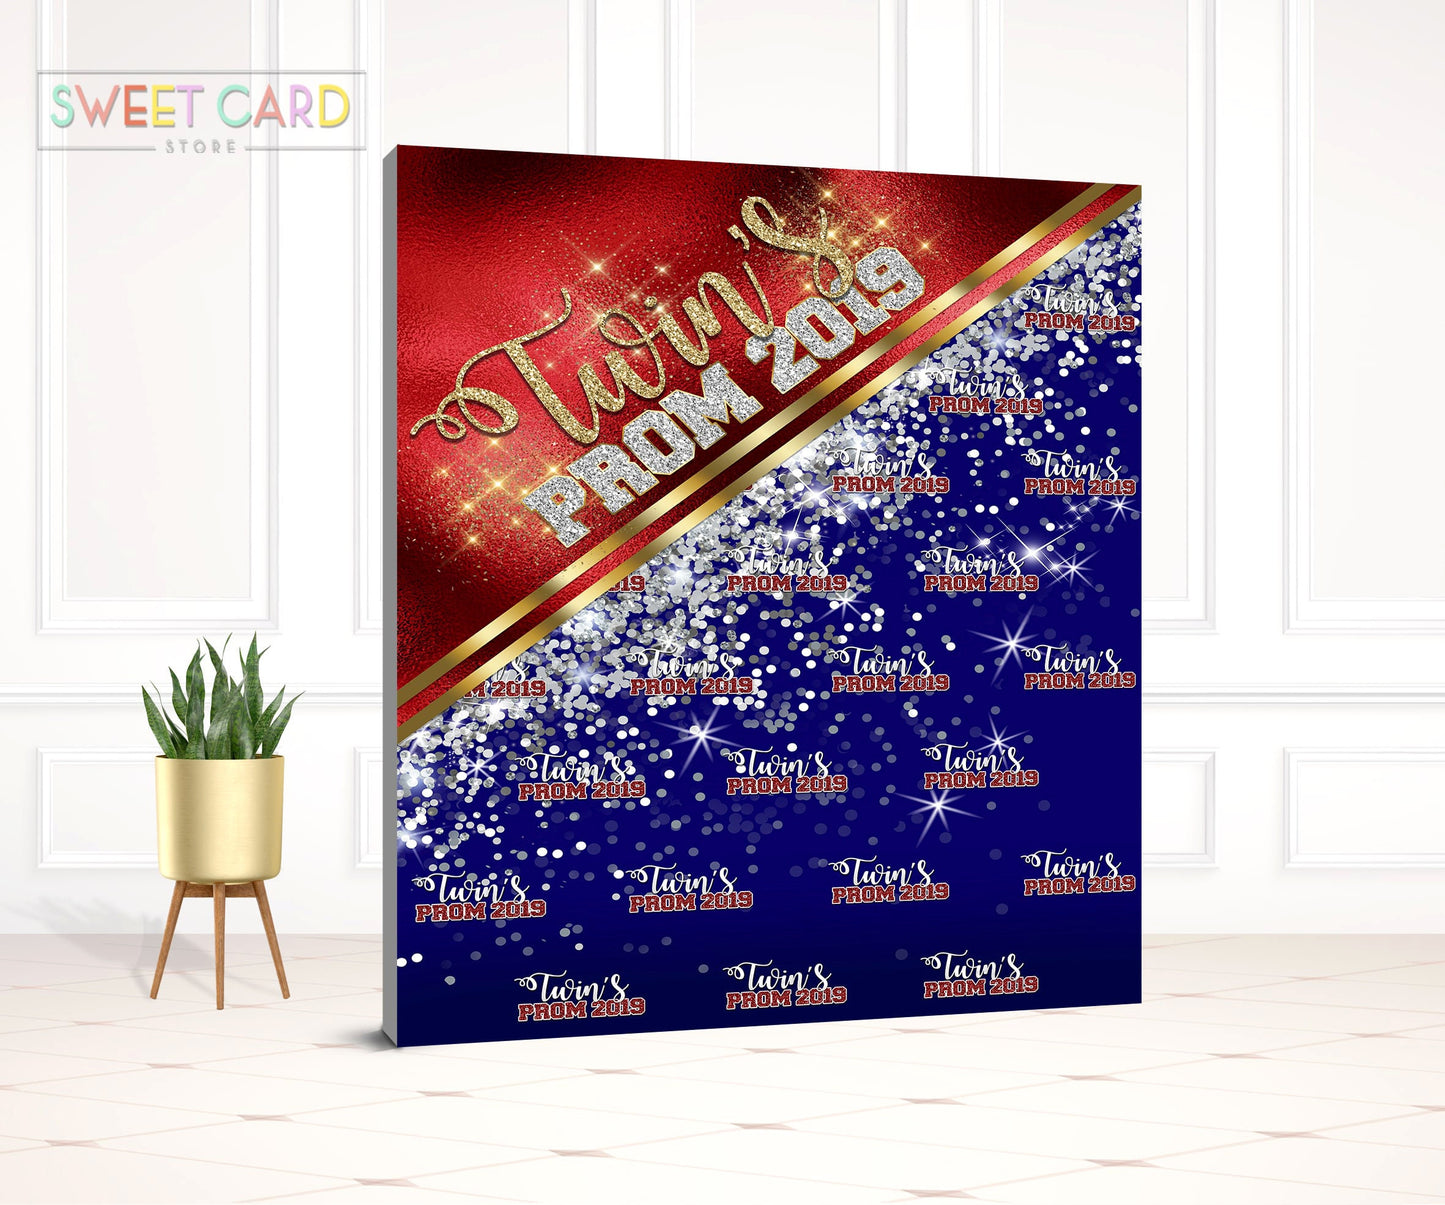 Prom glitter Step and Repeat Backdrop, Prom Elegant Backdrop,  Prom decor, Prom party Backdrop, 2k23 Backdrop, Prom 2023, class of 2023